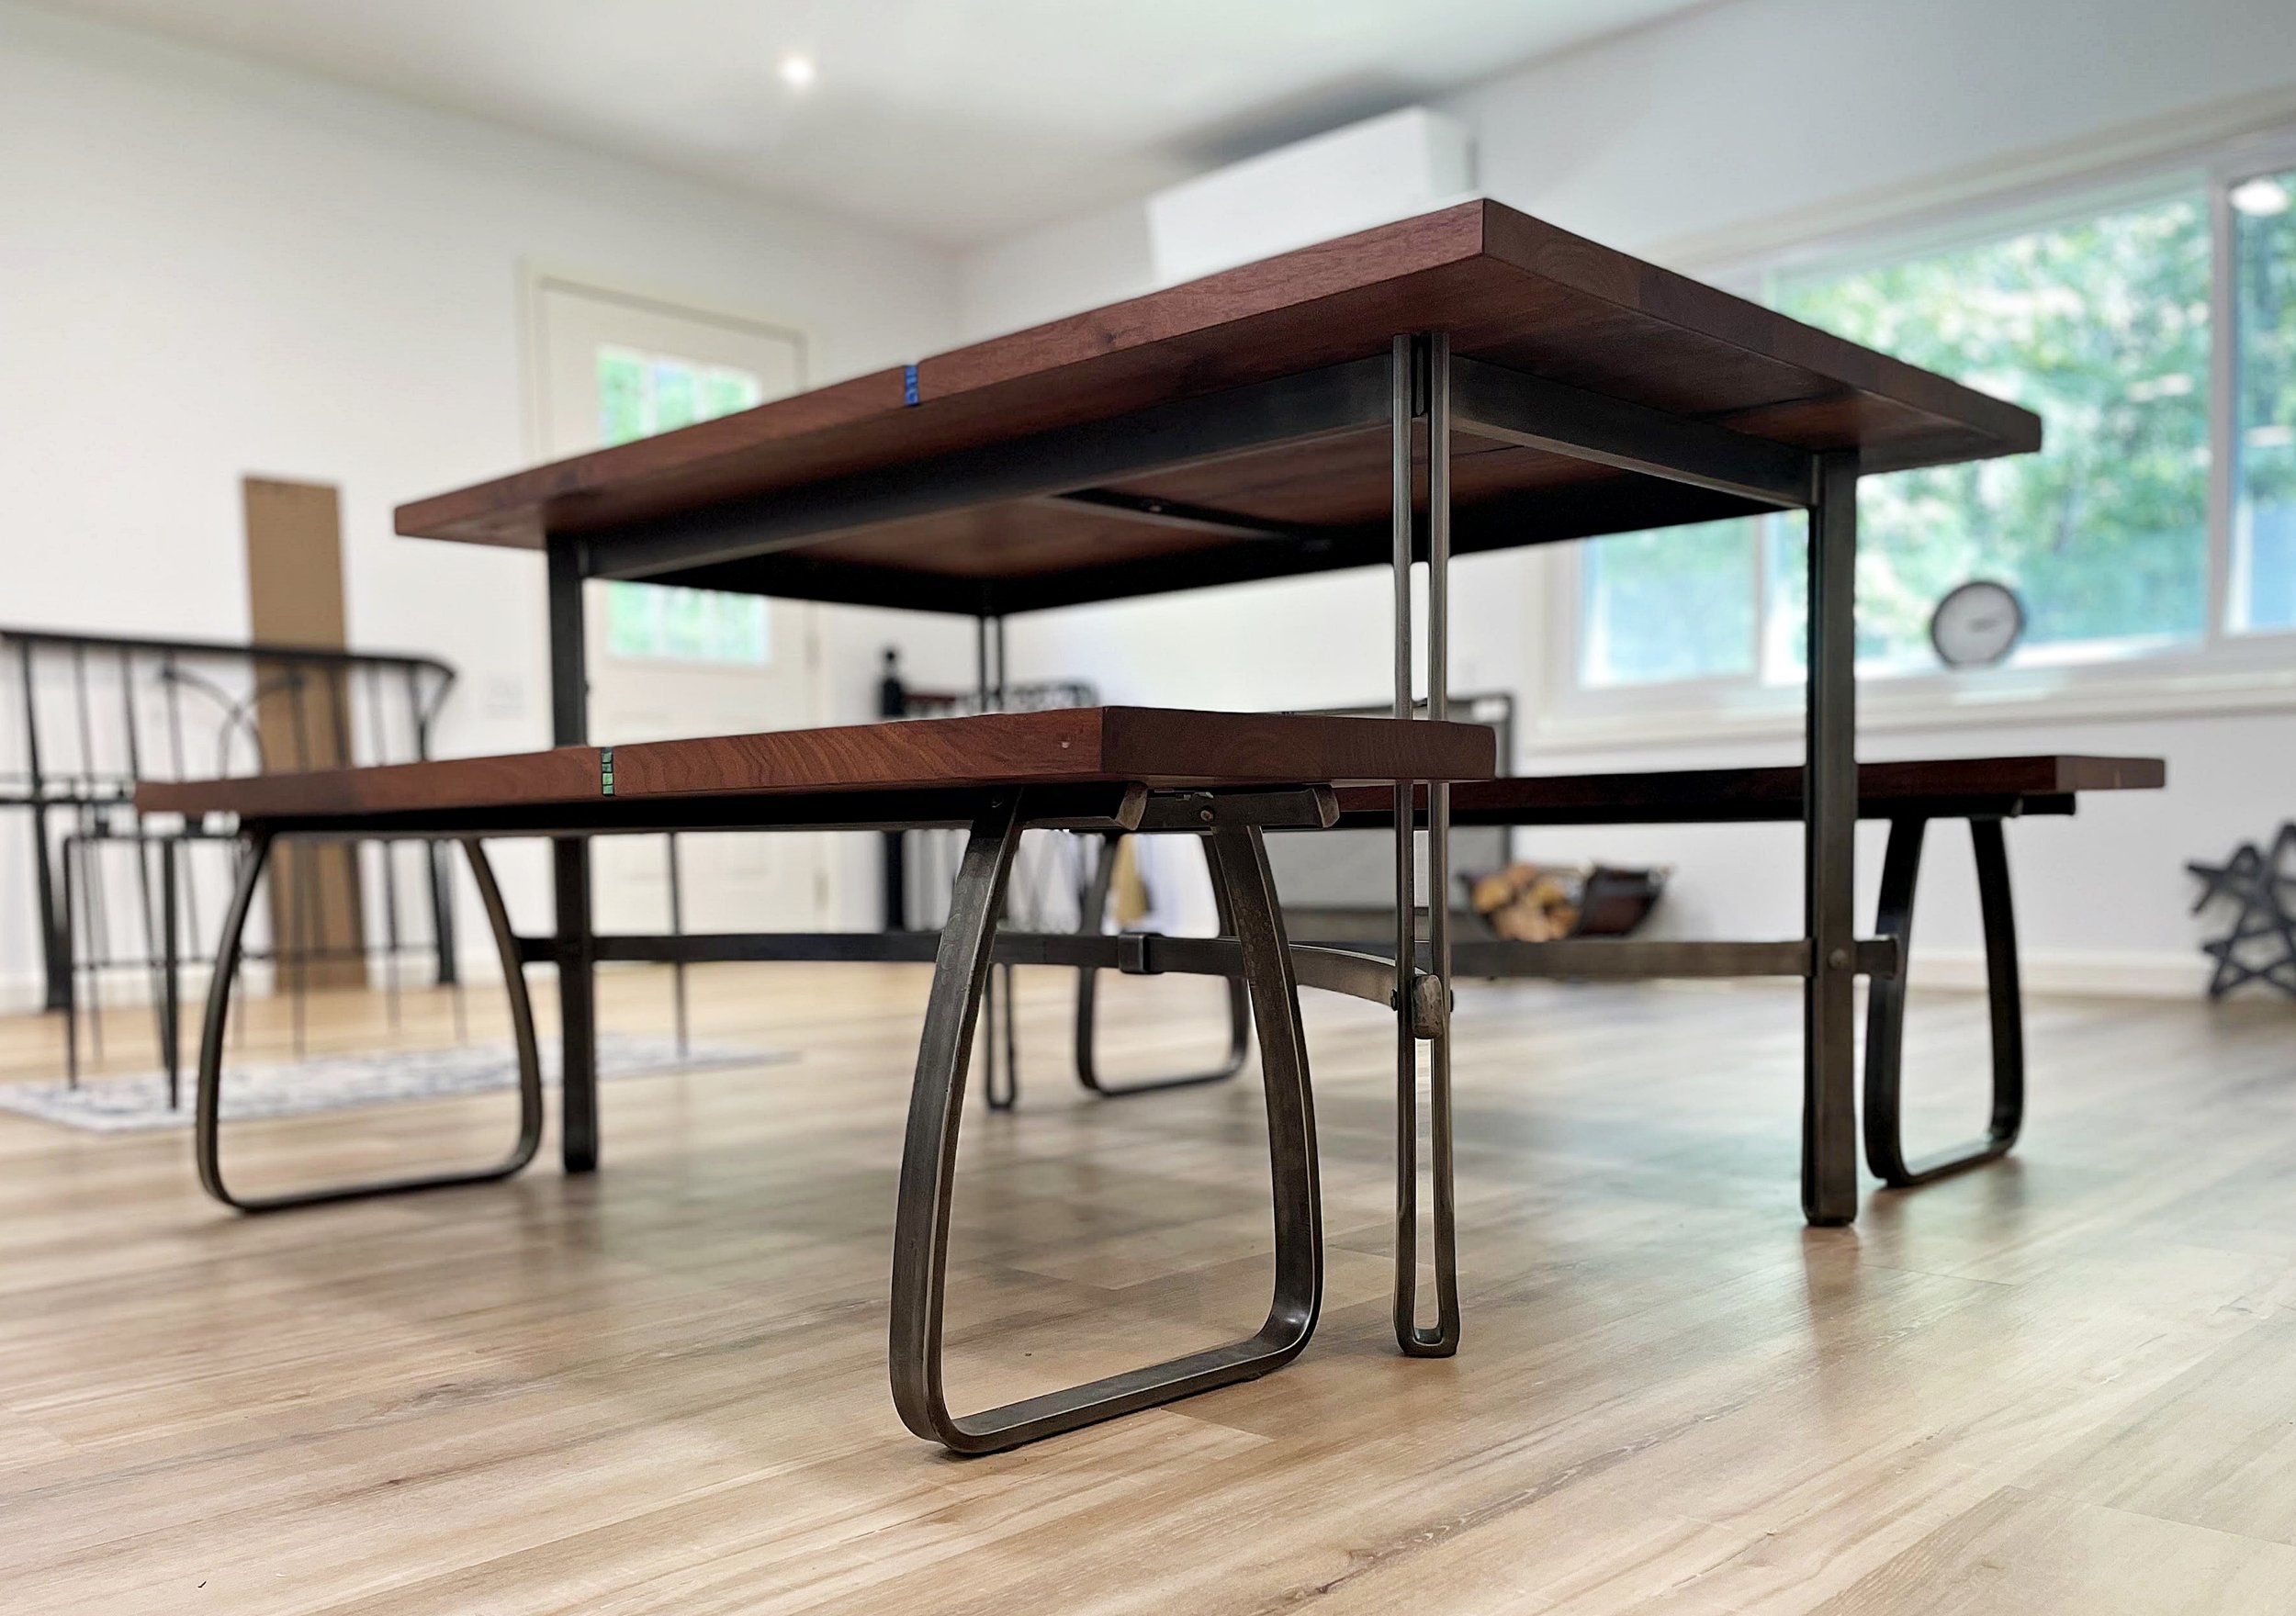 Custom dining table and benches with forged steel bases